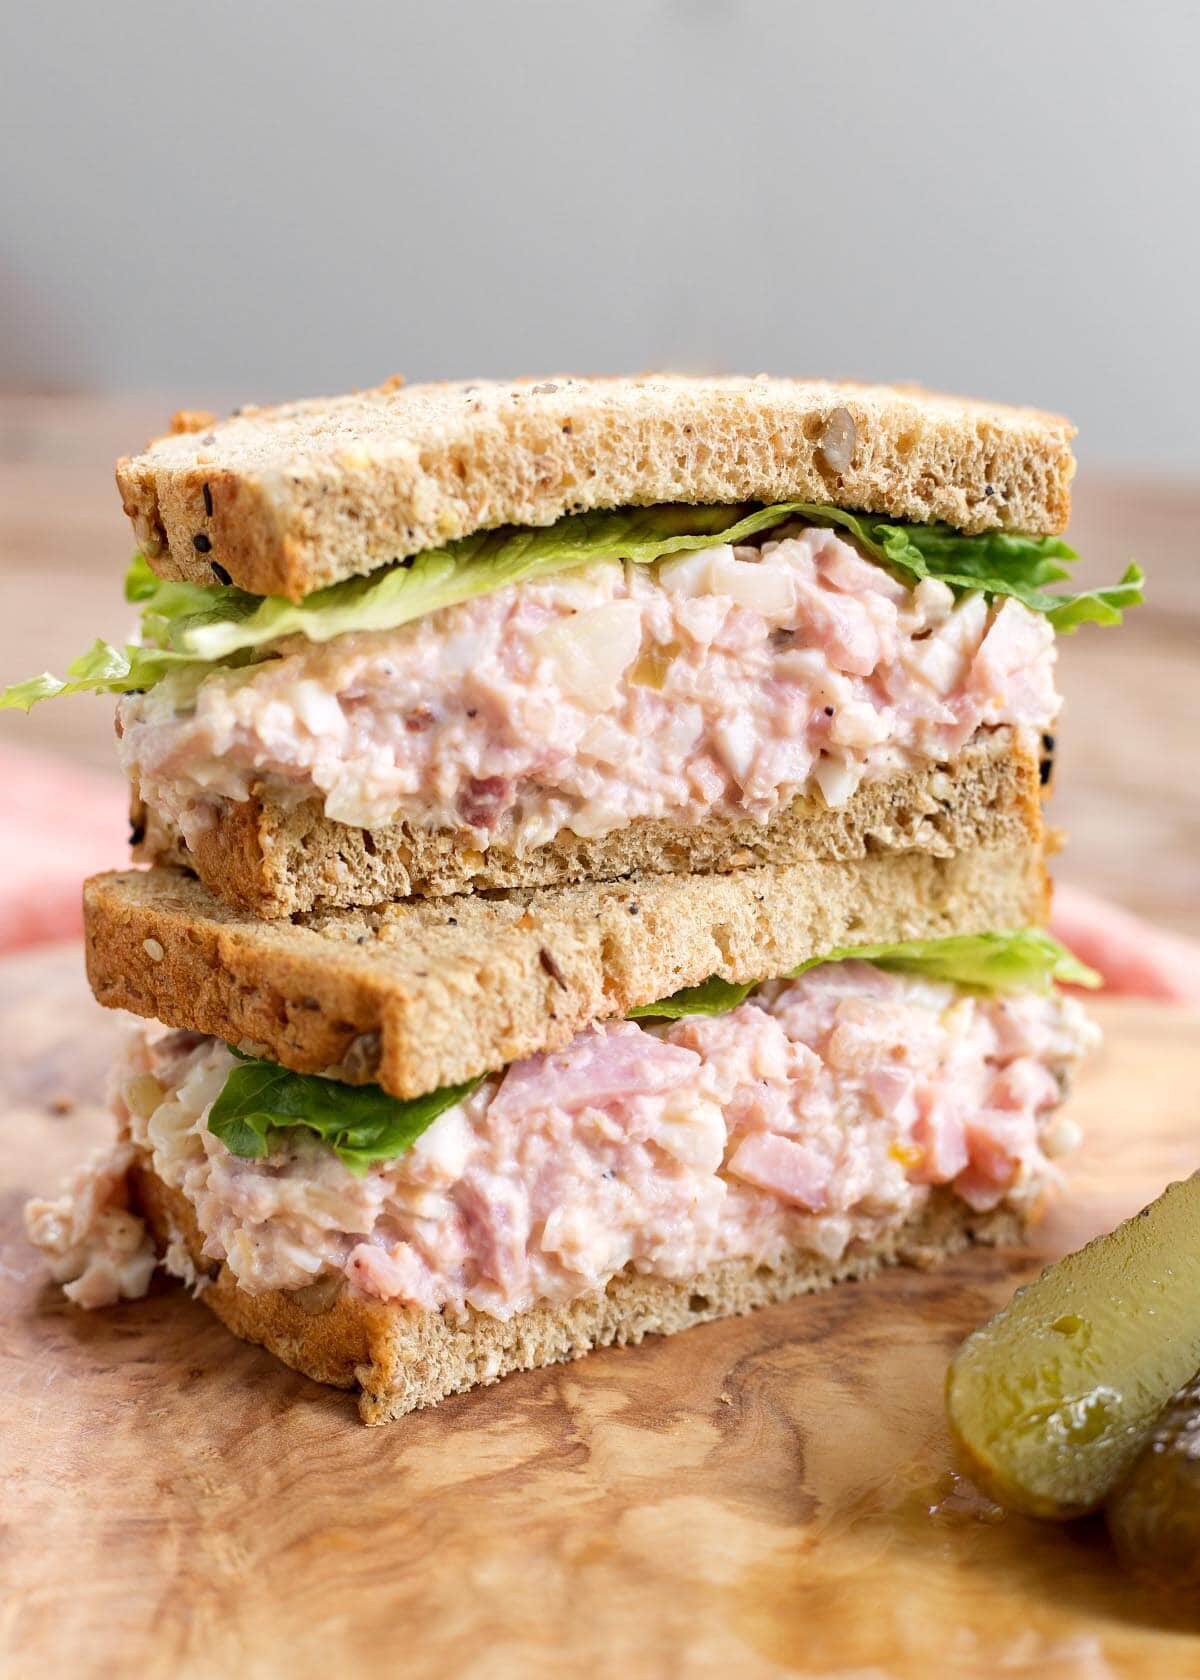 Classic Ham Salad sandwich scut in half and stacked